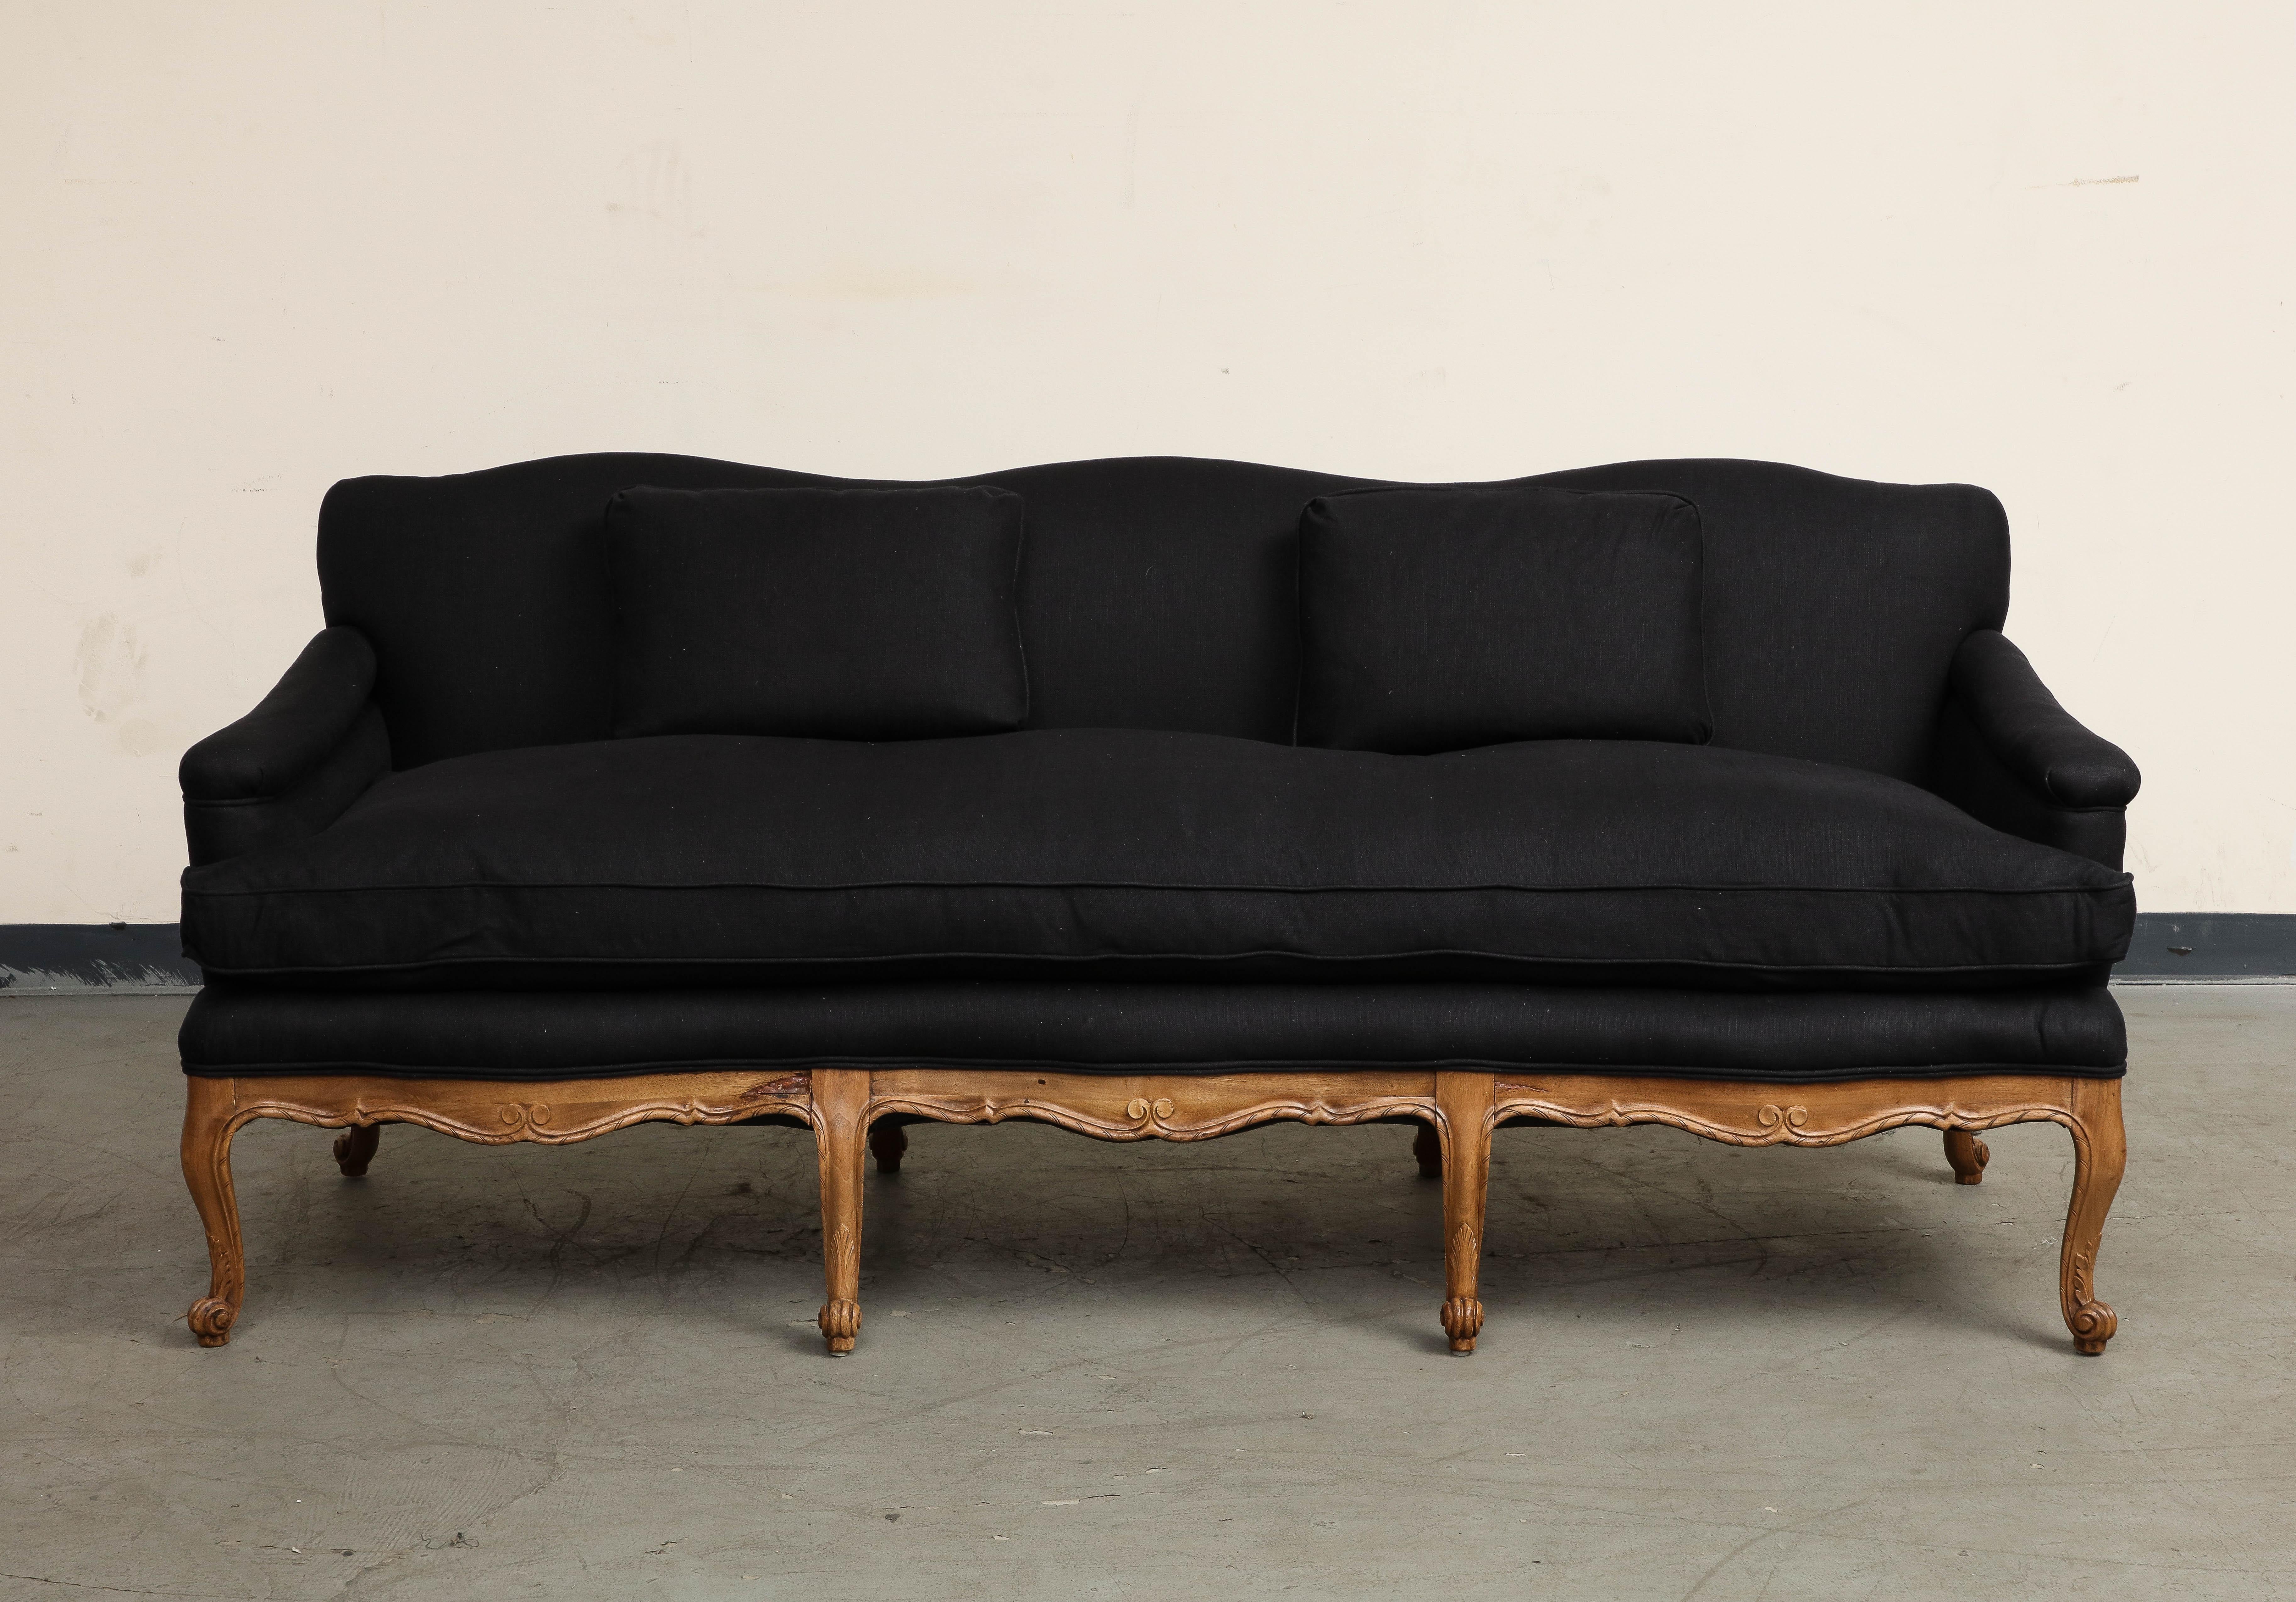 Louis XV Style French Carved Walnut Sofa, c. 1920s, newly reupholstered in heavyweight black linen. Frame and elegant scroll legs have been restored and refinished to natural walnut. 
